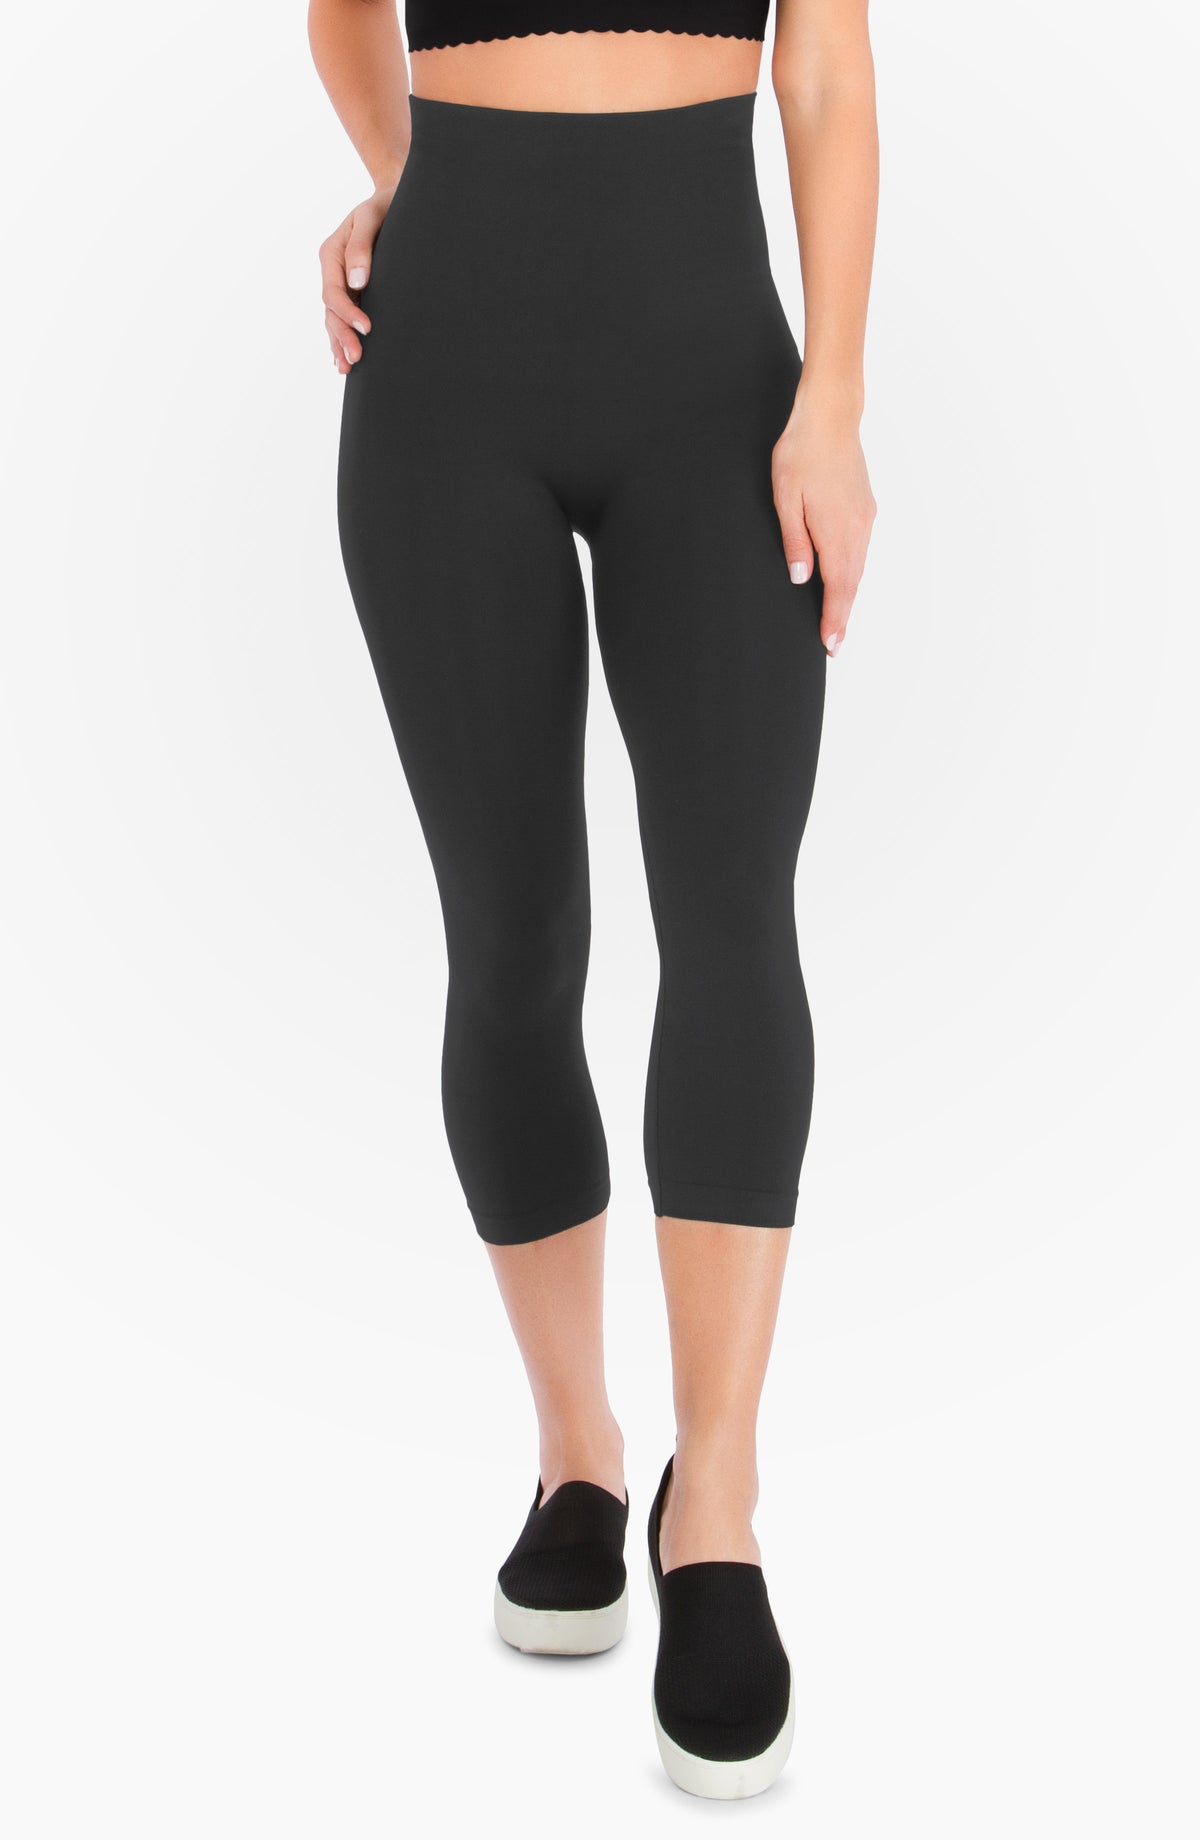 Venus Cow ಮೇಲೆ X: No more cringing for Mums with teenagers who love their  black leggings  #thepbl  / X